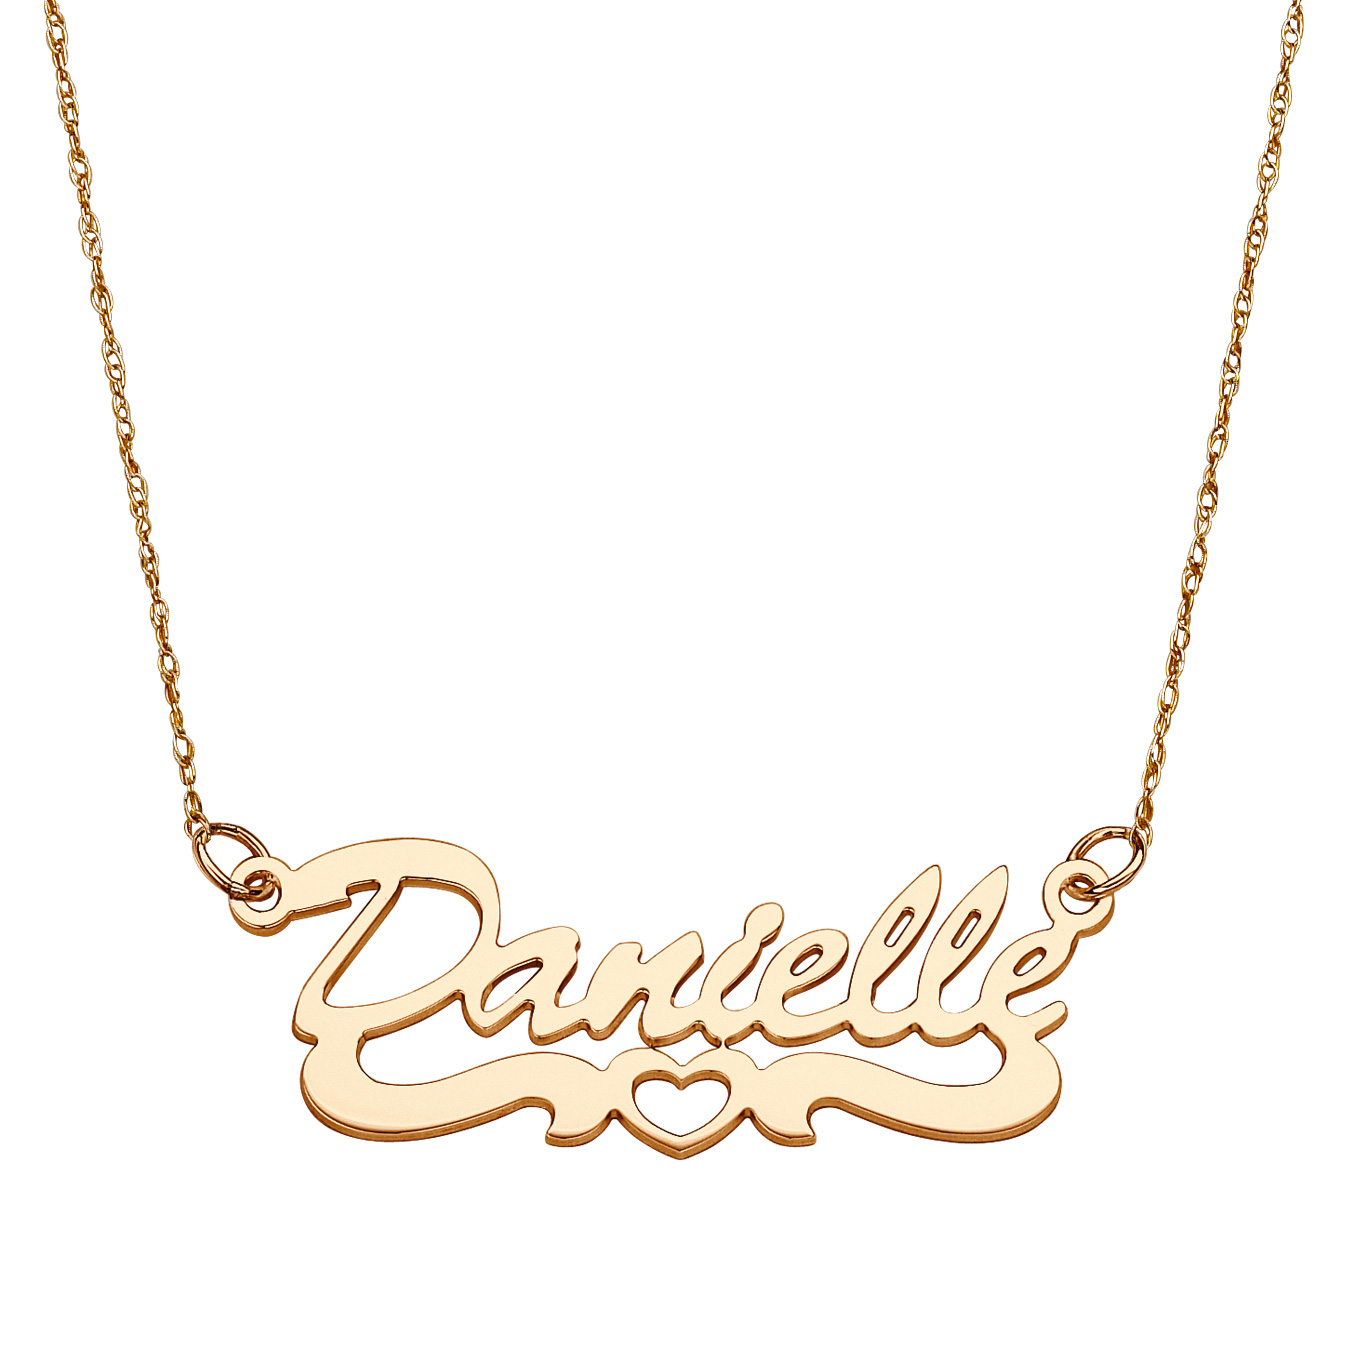 14K Gold over Sterling Script Name Necklace with Open Heart Tail